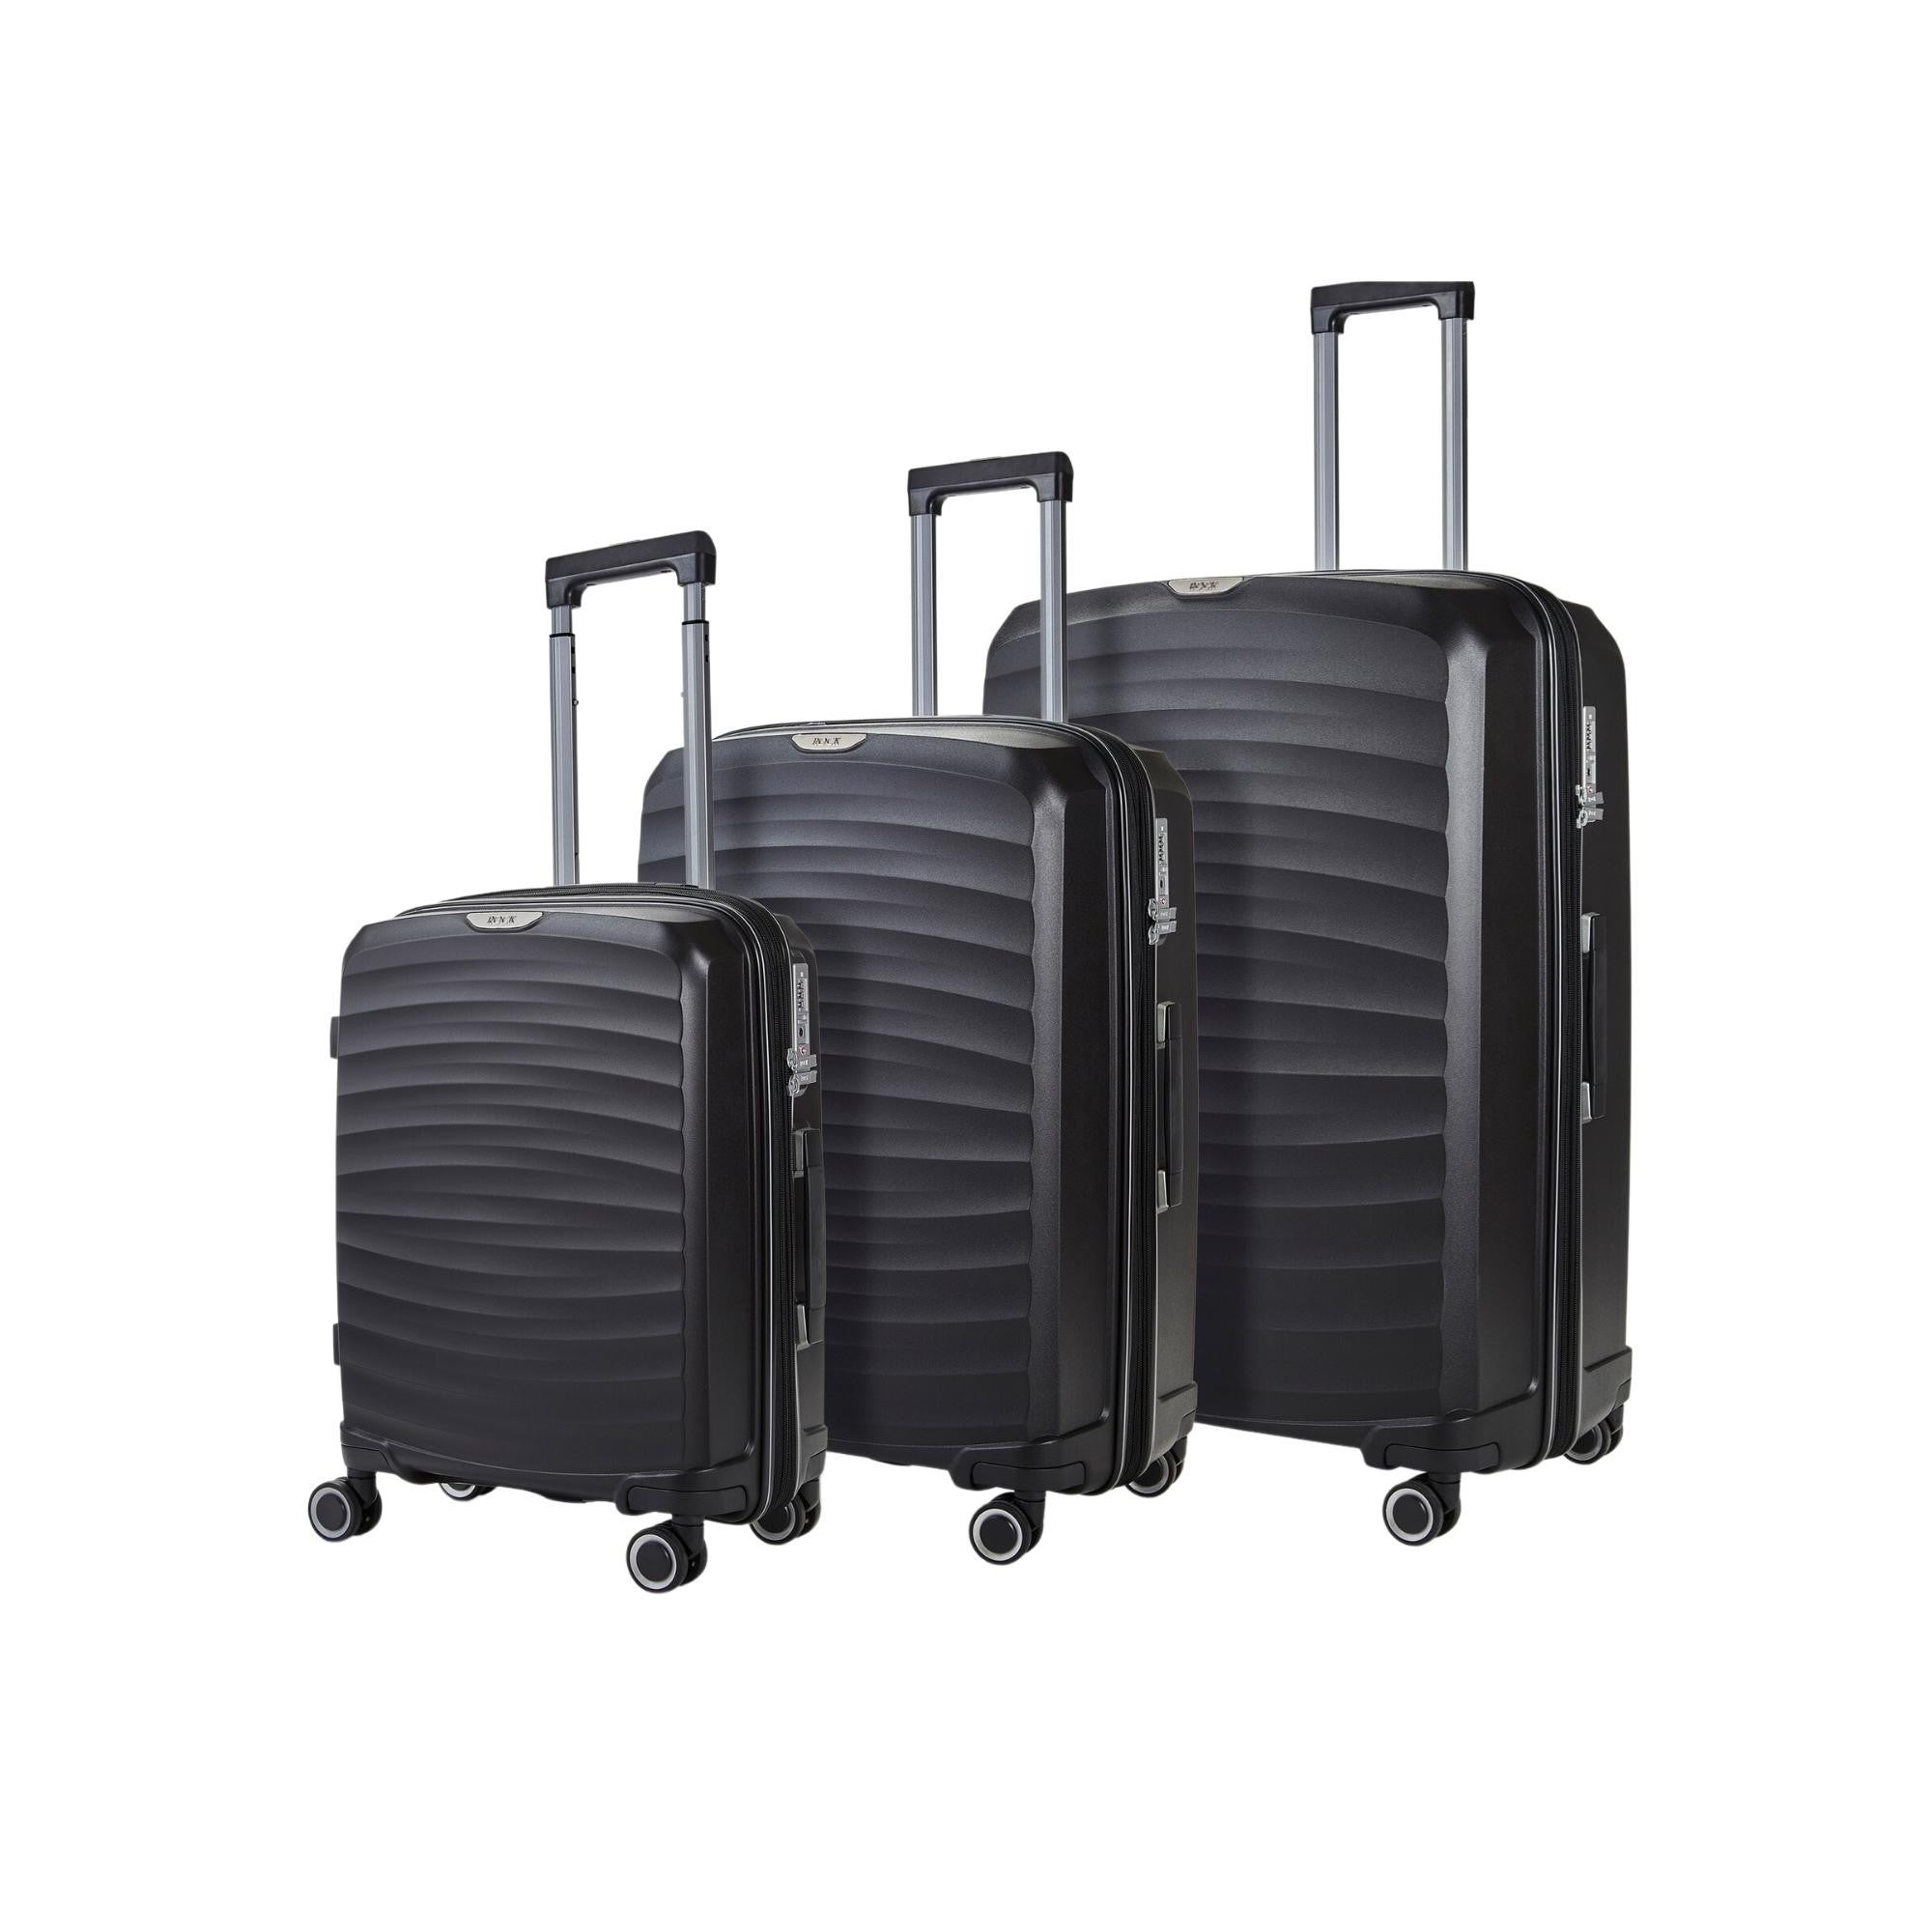 Photos - Other Bags & Accessories ROCK Luggage Sunwave Set of 3 Suitcases Black 